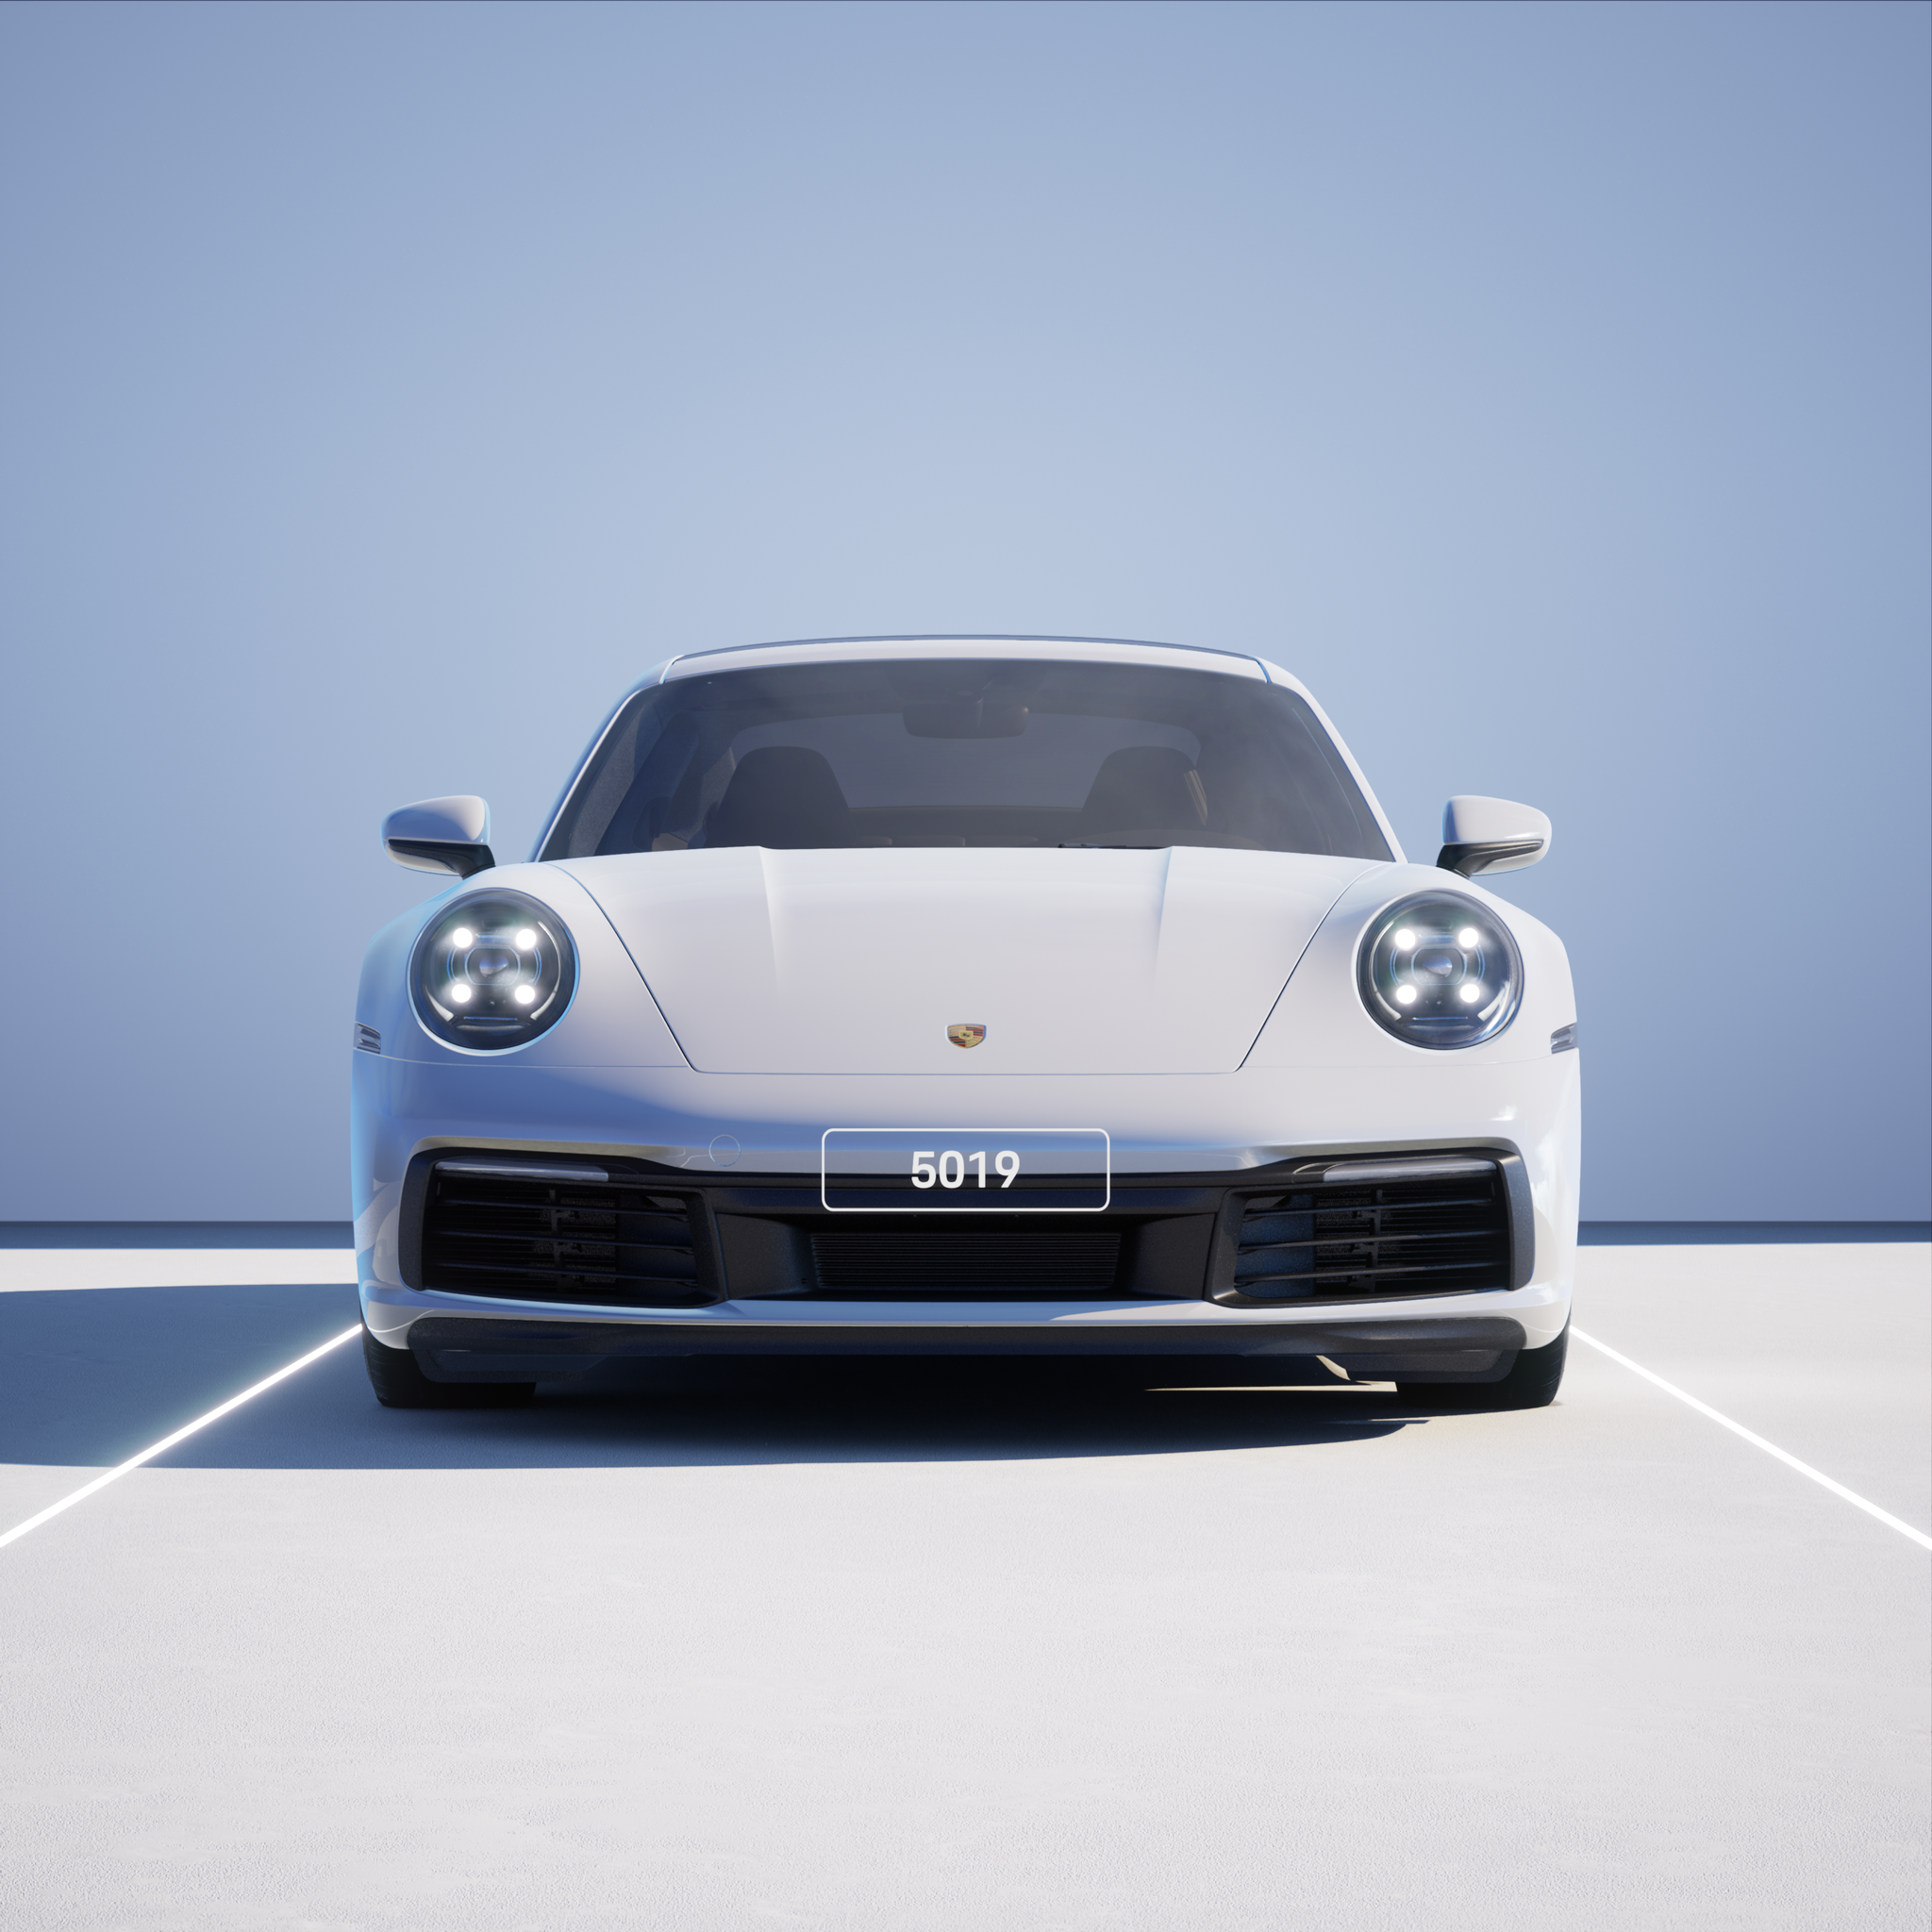 The PORSCHΞ 911 5019 image in phase